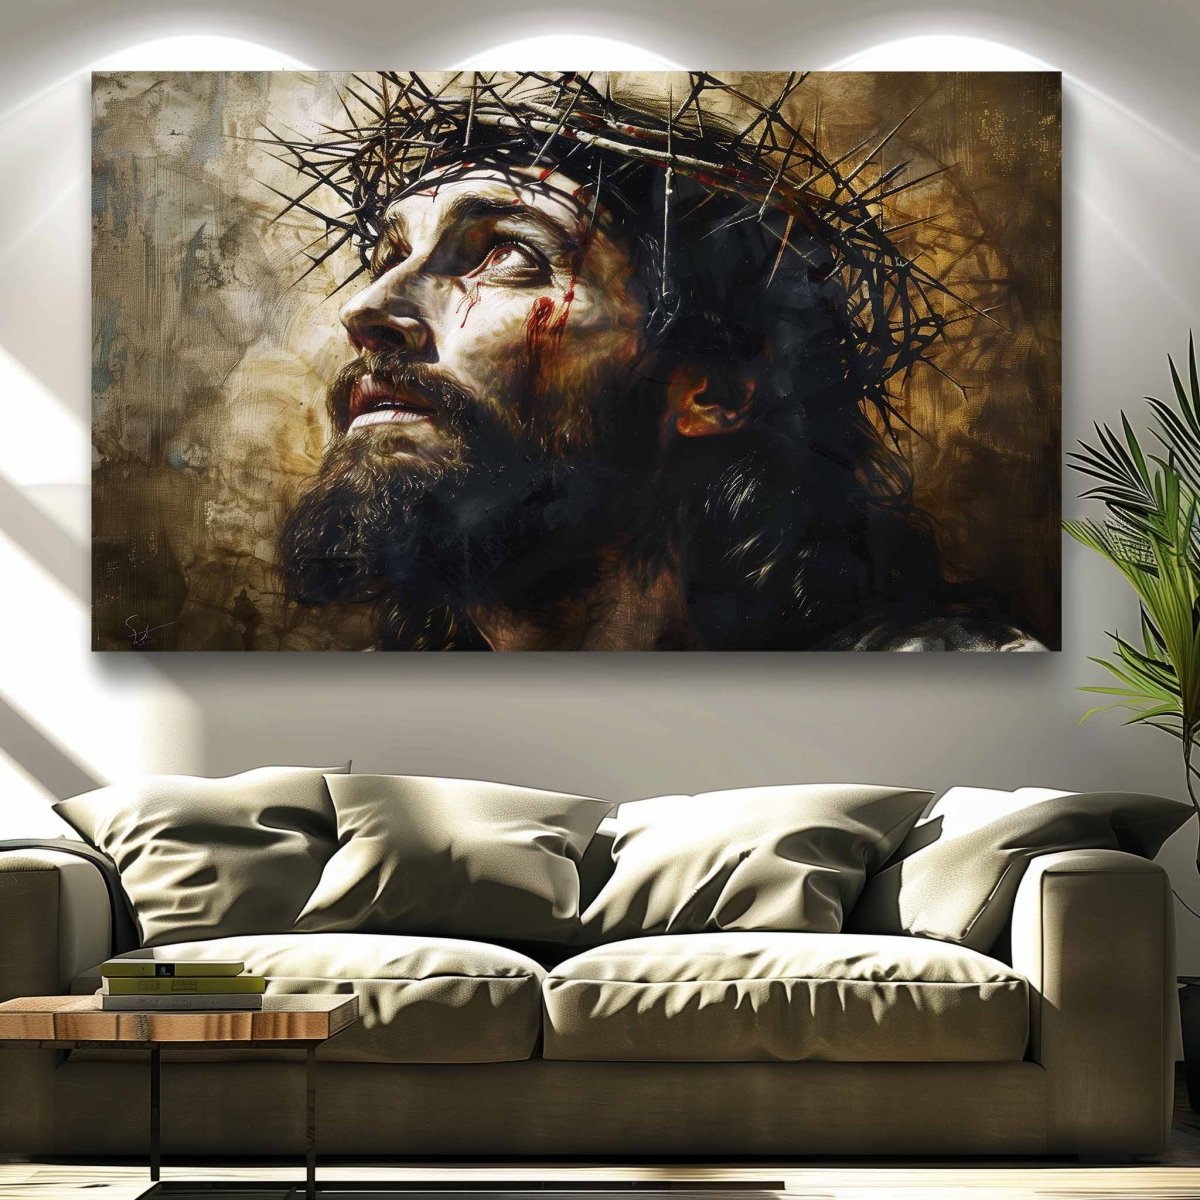 Masih:The Man of Sorrows Canvas Wall Painting (36 x 24 Inches)